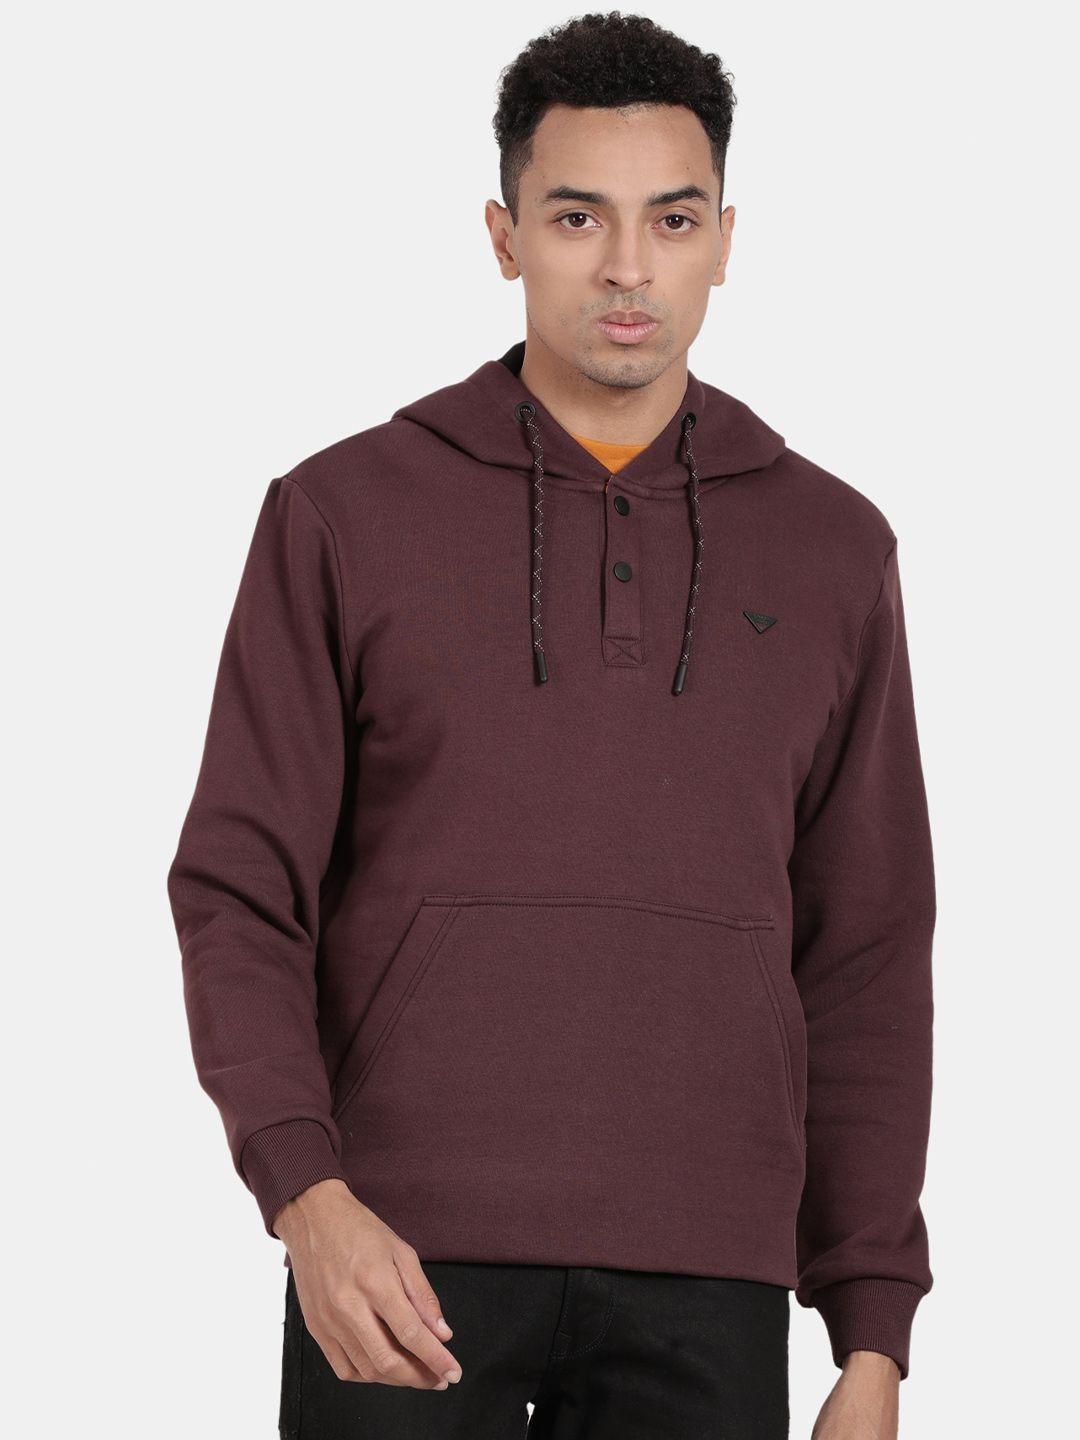 t-base long sleeves hooded pullover